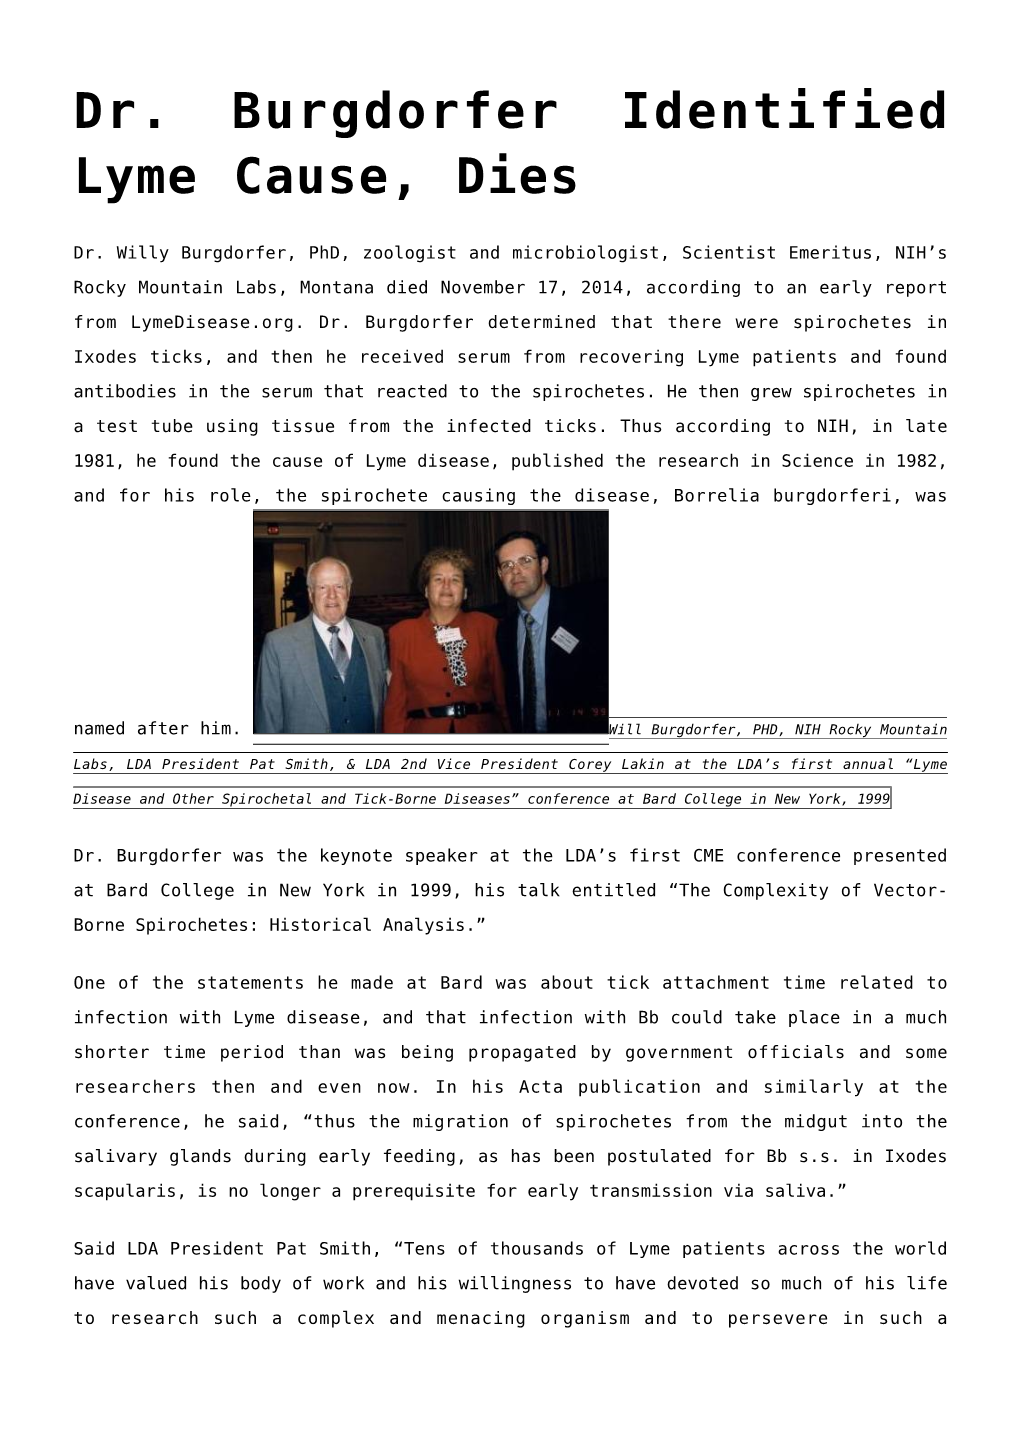 Dr. Burgdorfer Identified Lyme Cause, Dies,EPA Fall 2014 Newsletter